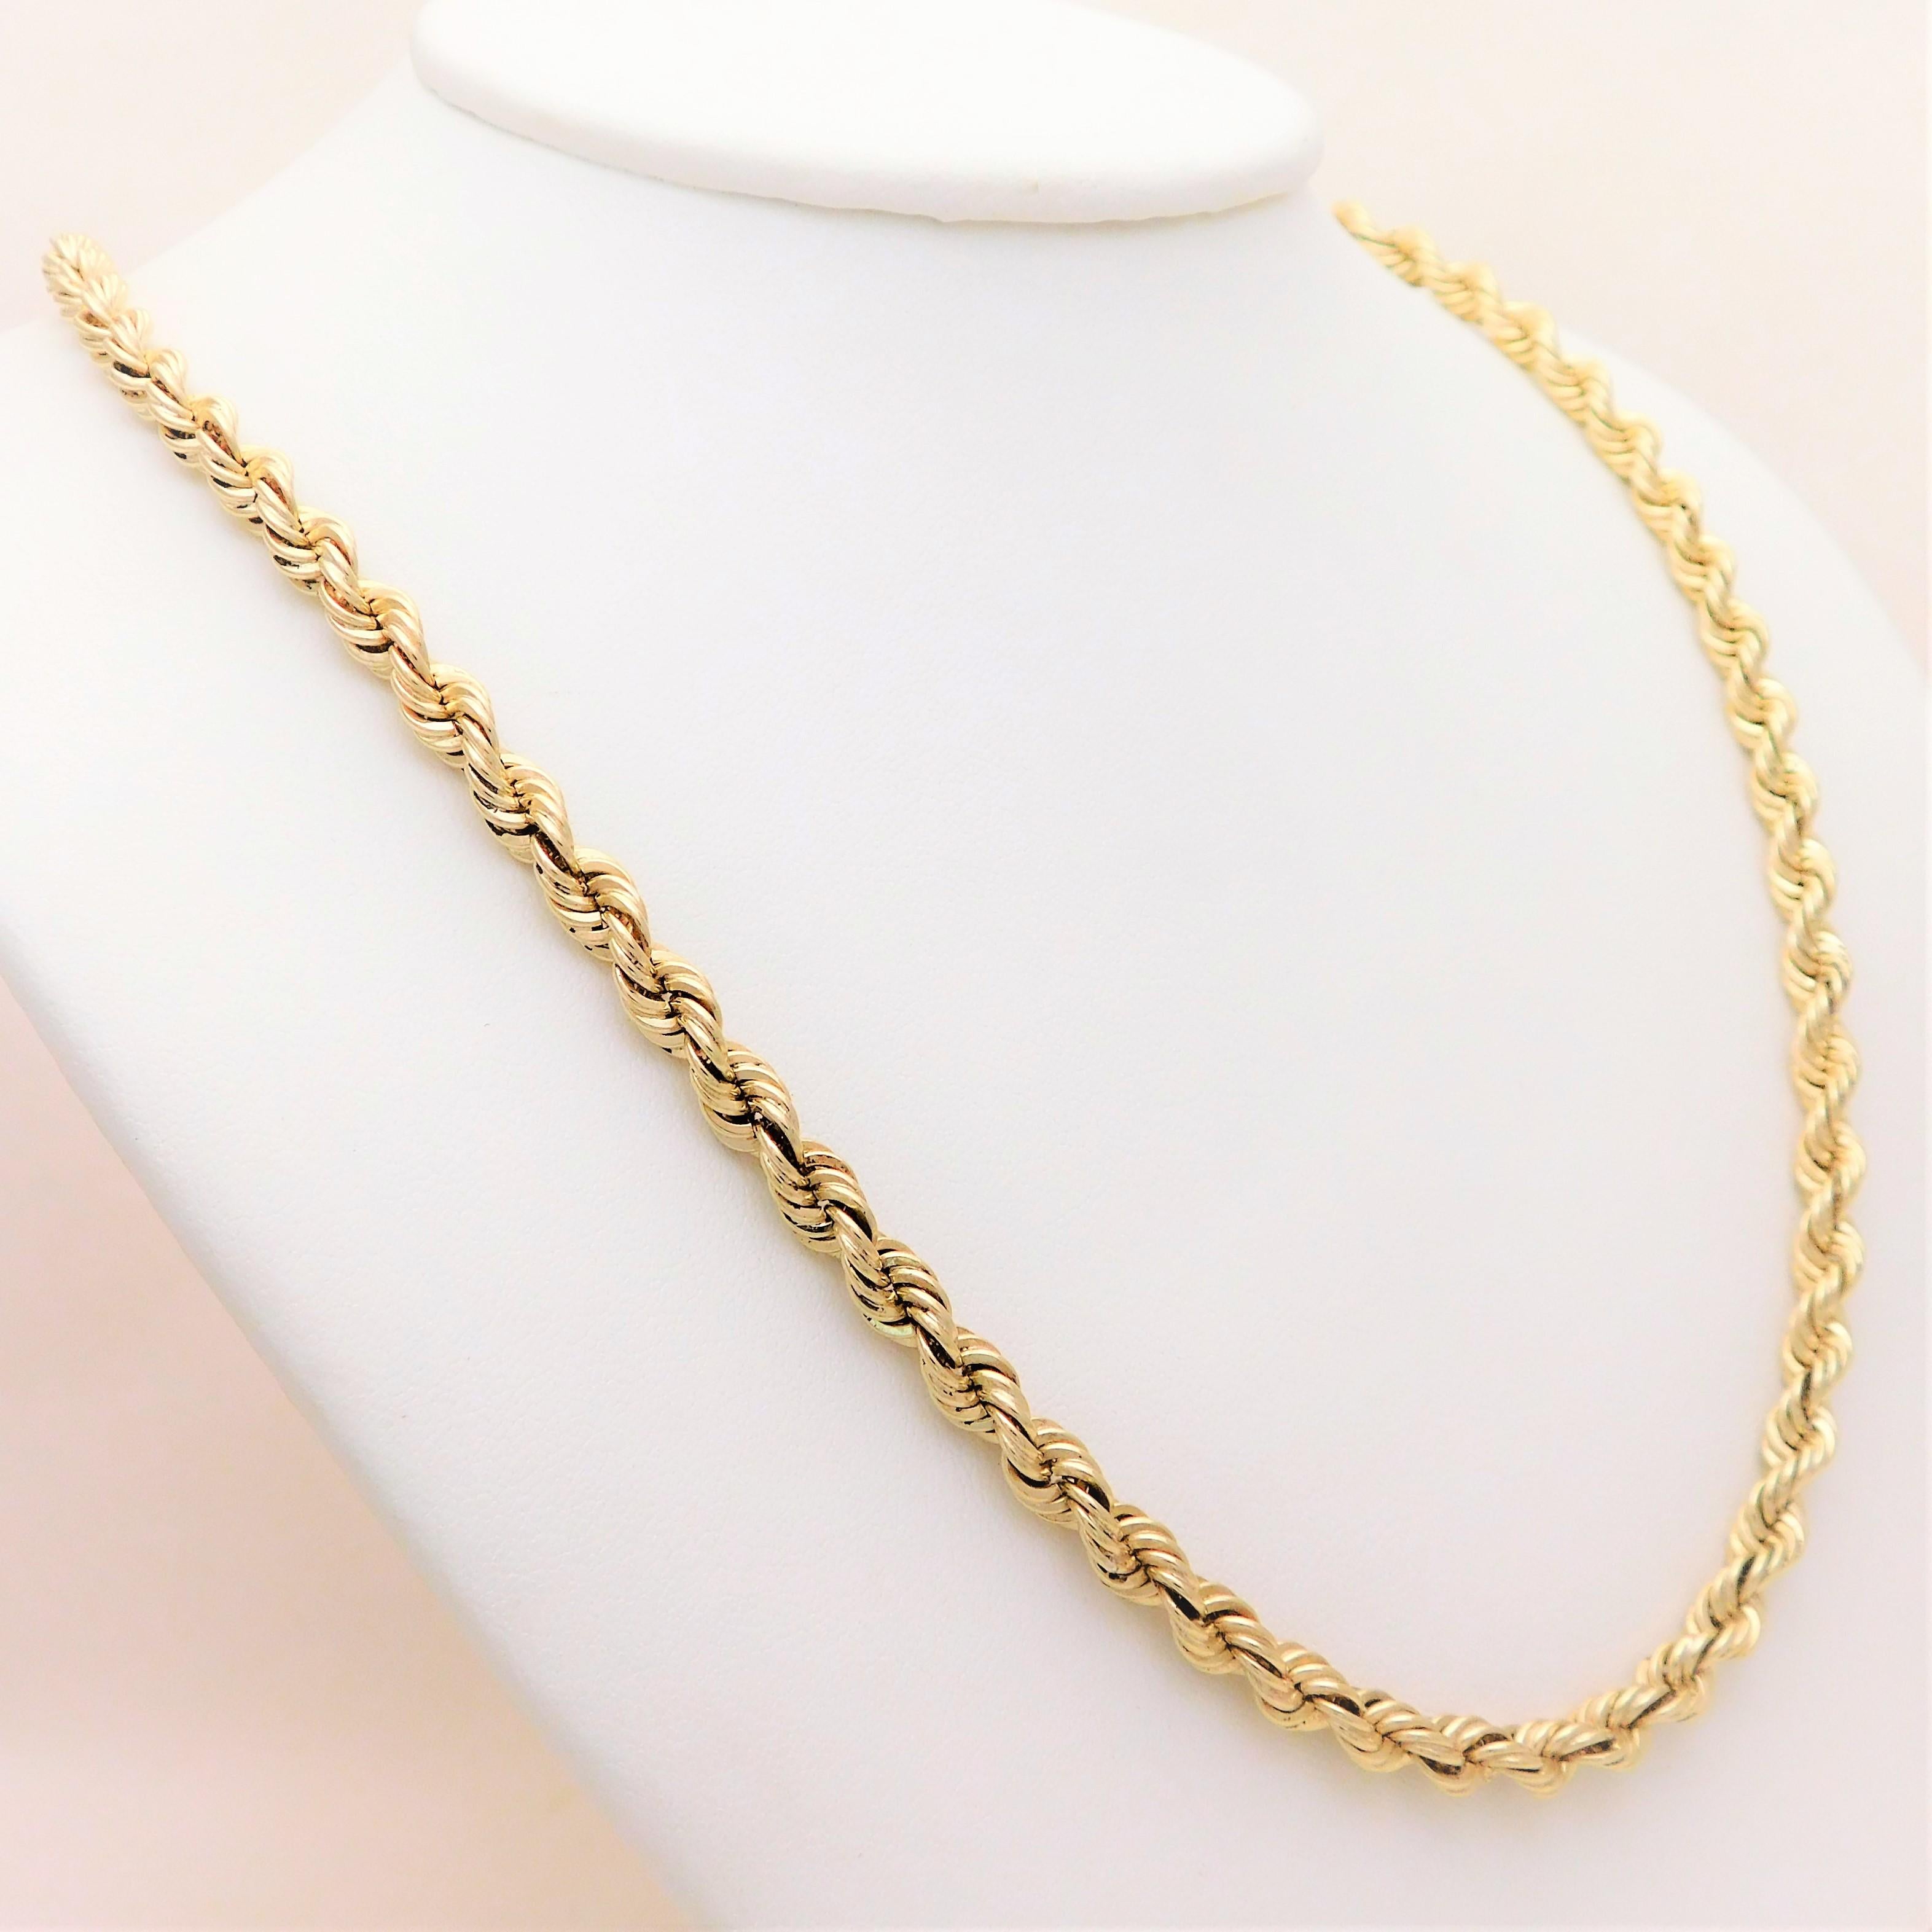 Heavy Rope Chain

Due to its strength and smart appearance, the rope chain has become one of the most popular jewelry designs in the world.  
From a dapper gentleman's estate.  This masculine chain-style necklace has been masterfully crafted in